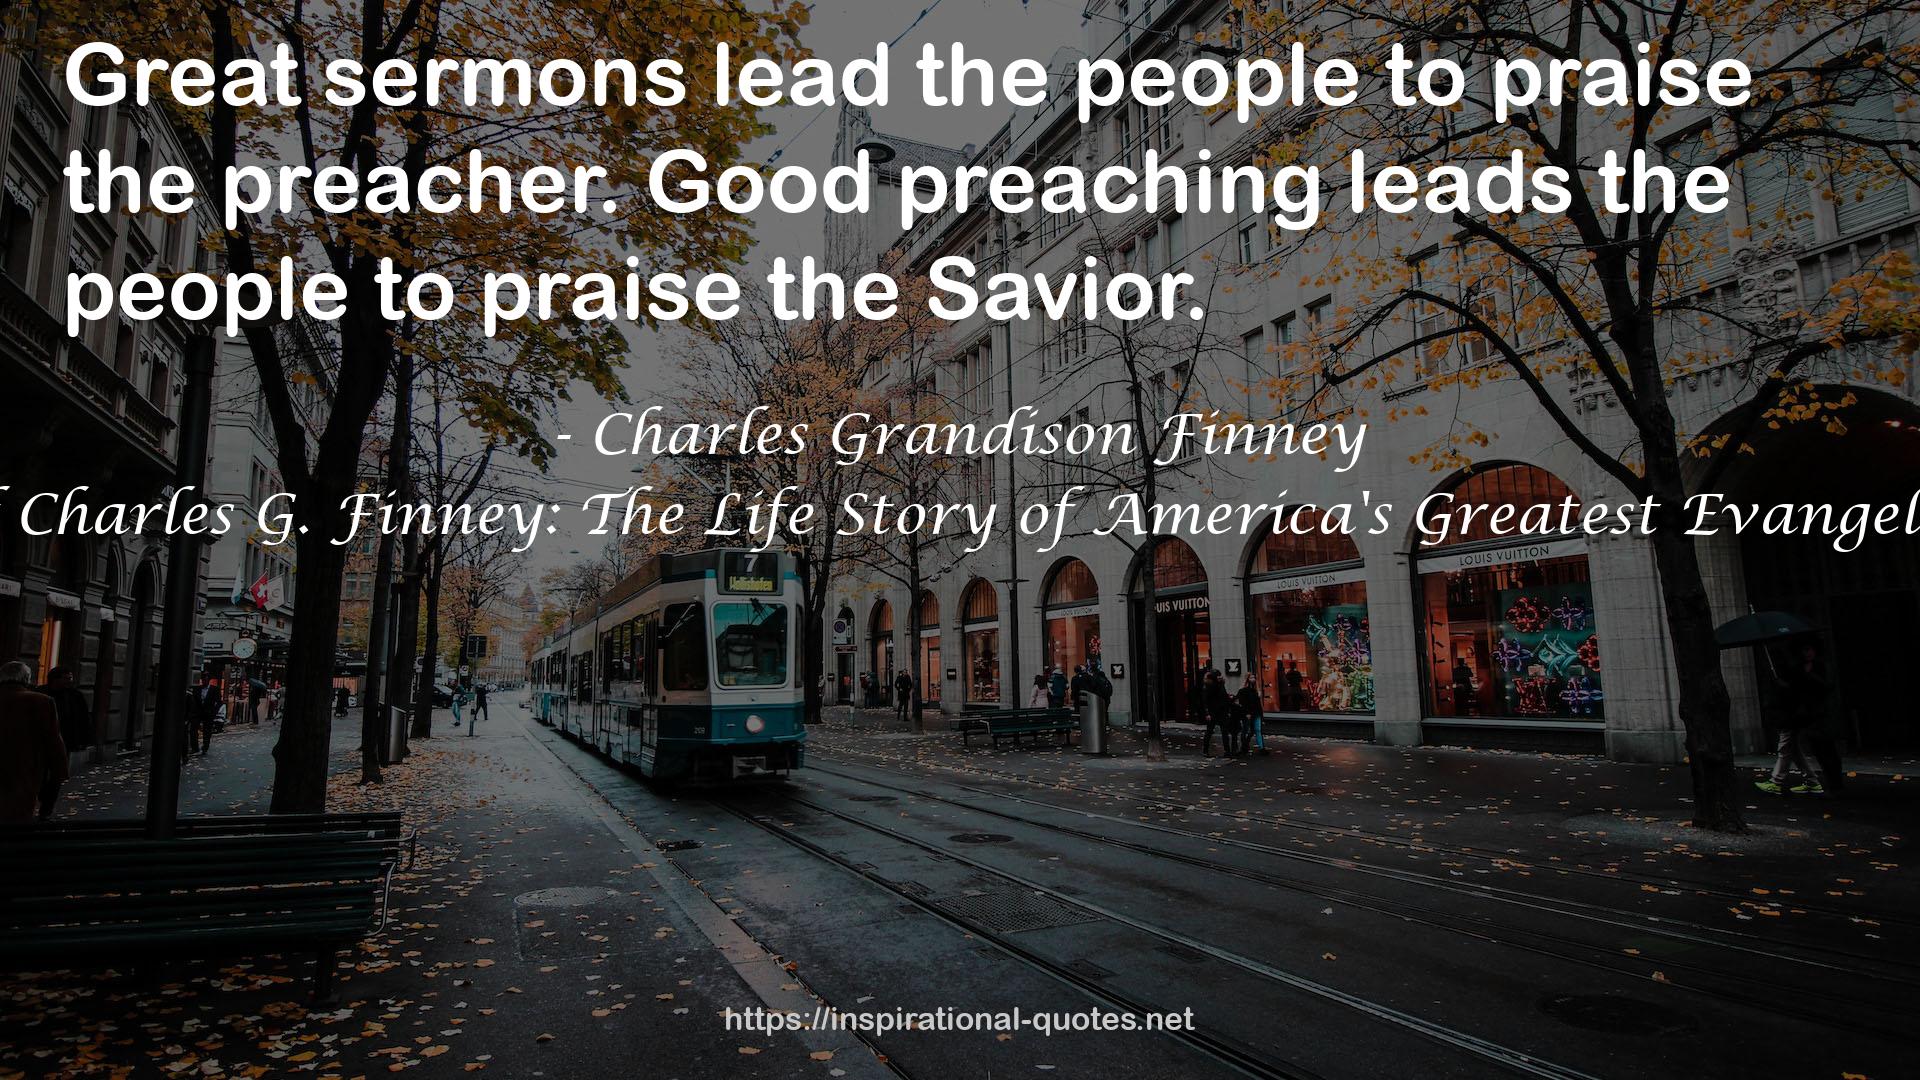 The Autobiography of Charles G. Finney: The Life Story of America's Greatest Evangelist--In His Own Words QUOTES